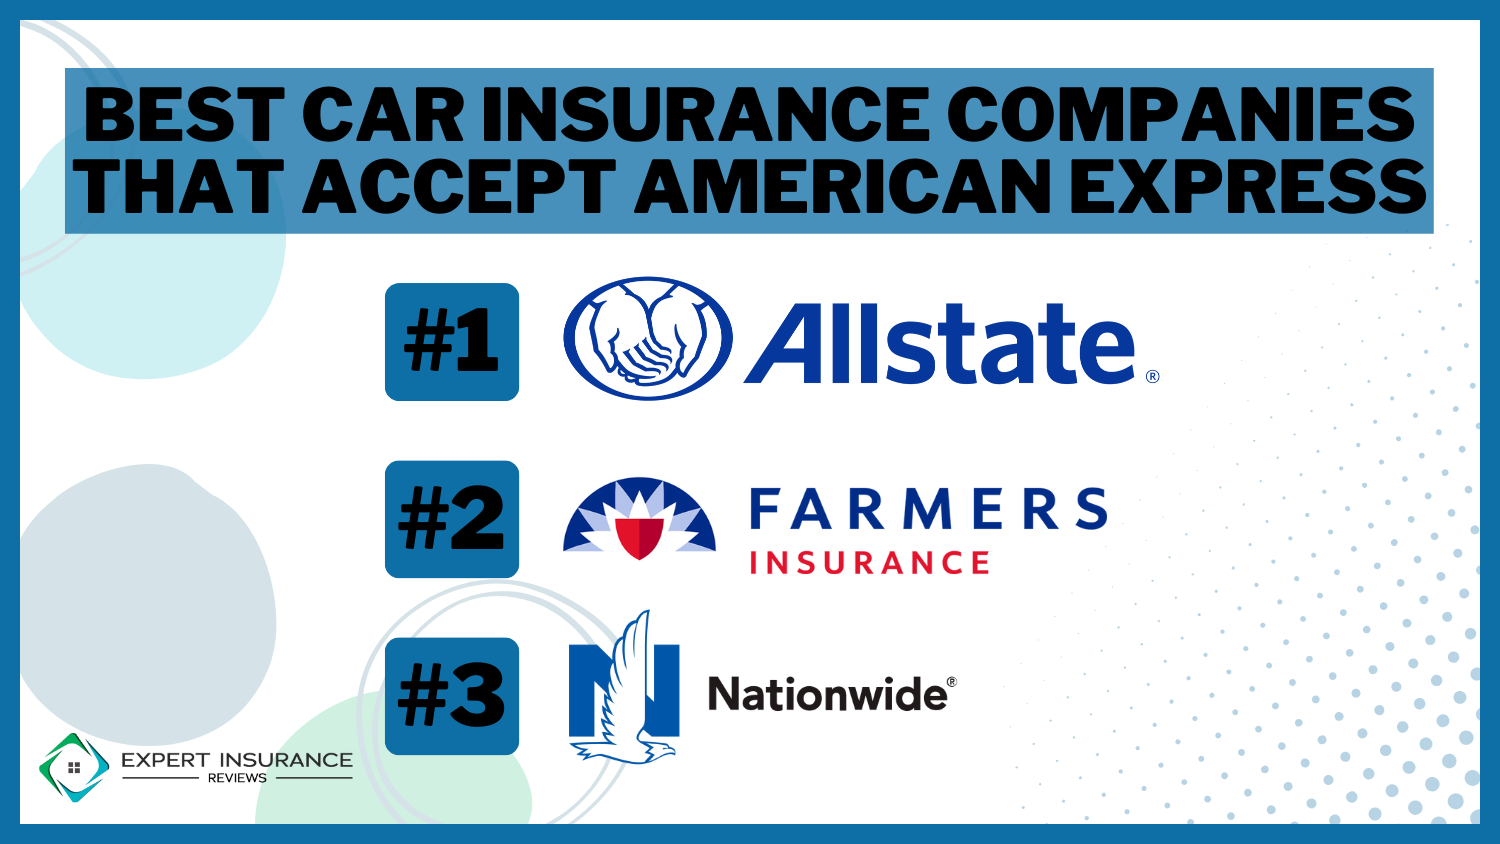 Best Car Insurance Companies that Accept American Express: Allstate, Farmers, and Nationwide